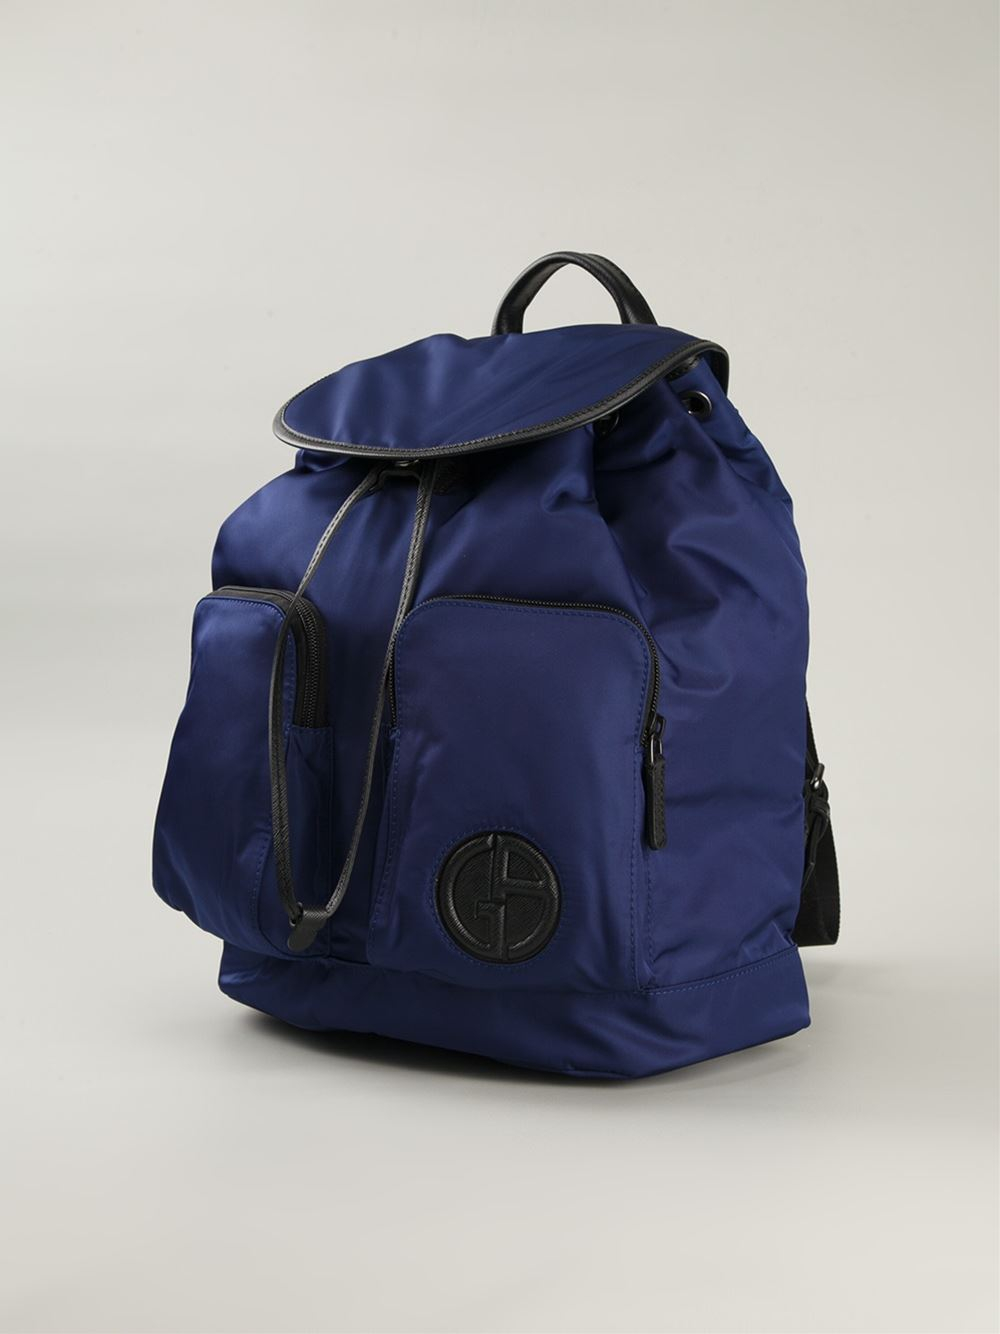 Lyst - Giorgio Armani Leather Trim Backpack in Blue for Men